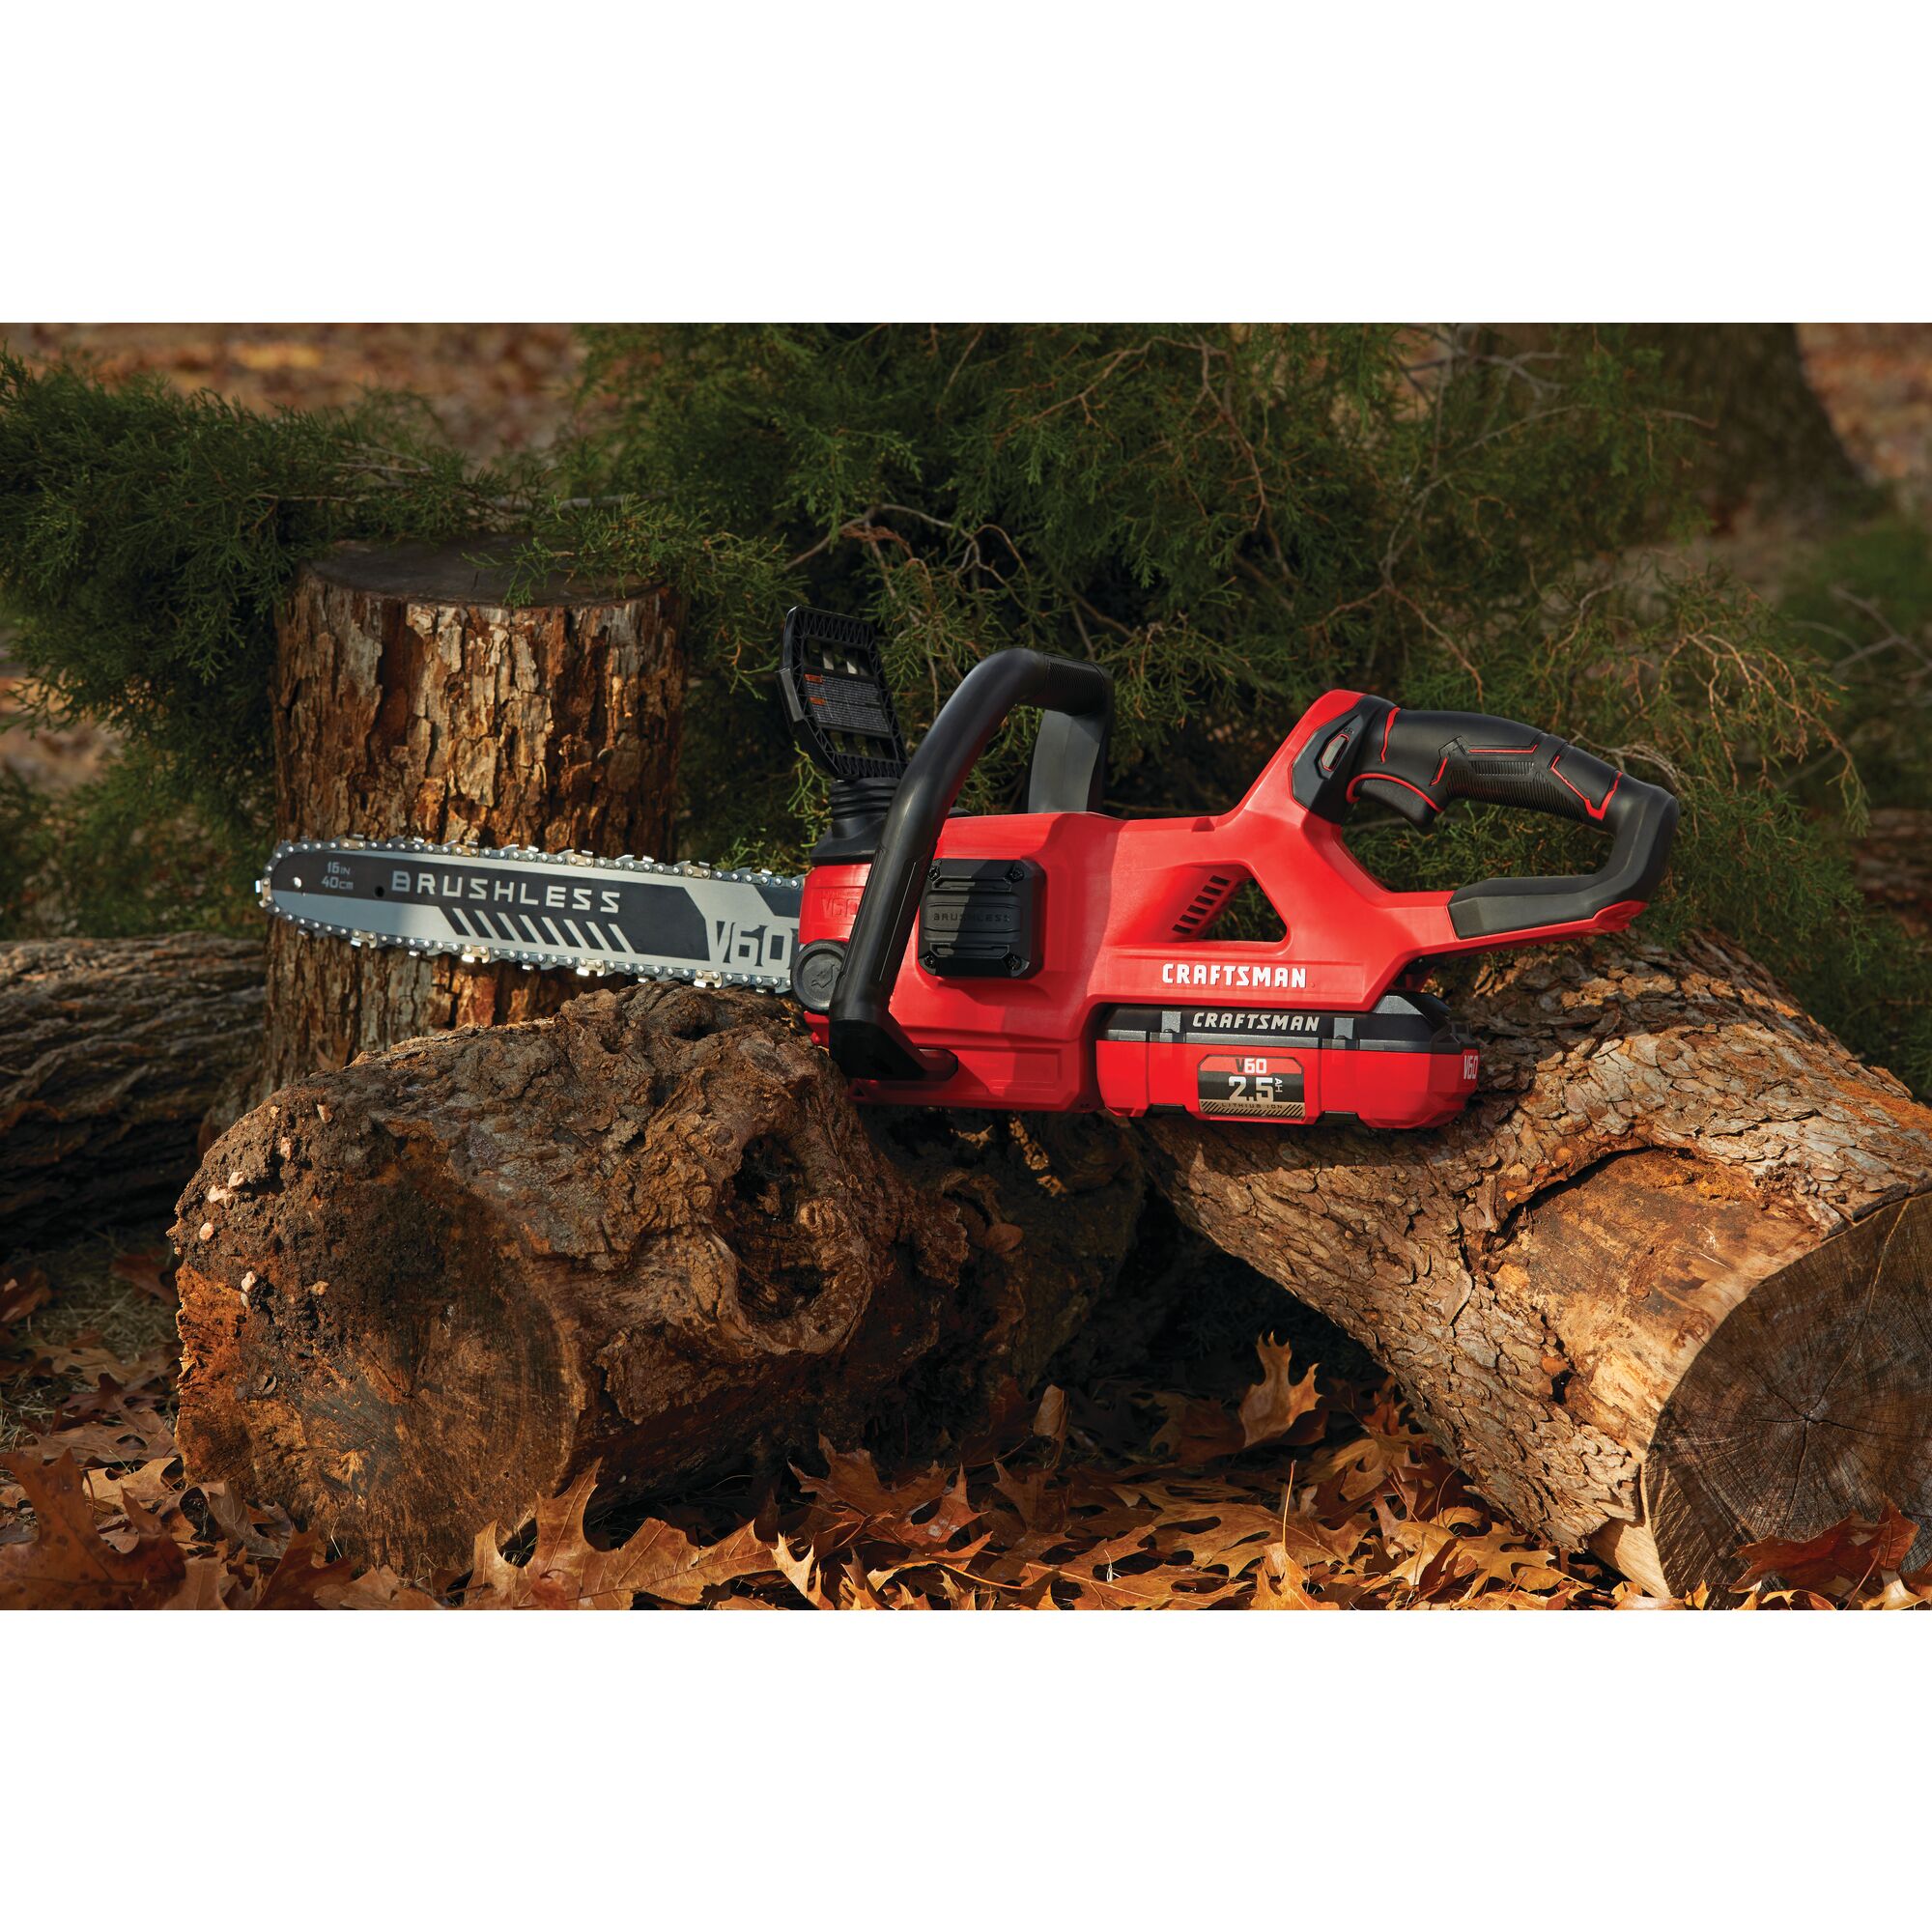 Volt 60 cordless 16 inch brushless chainsaw kit 2.5 Amp hour placed on wooden logs.